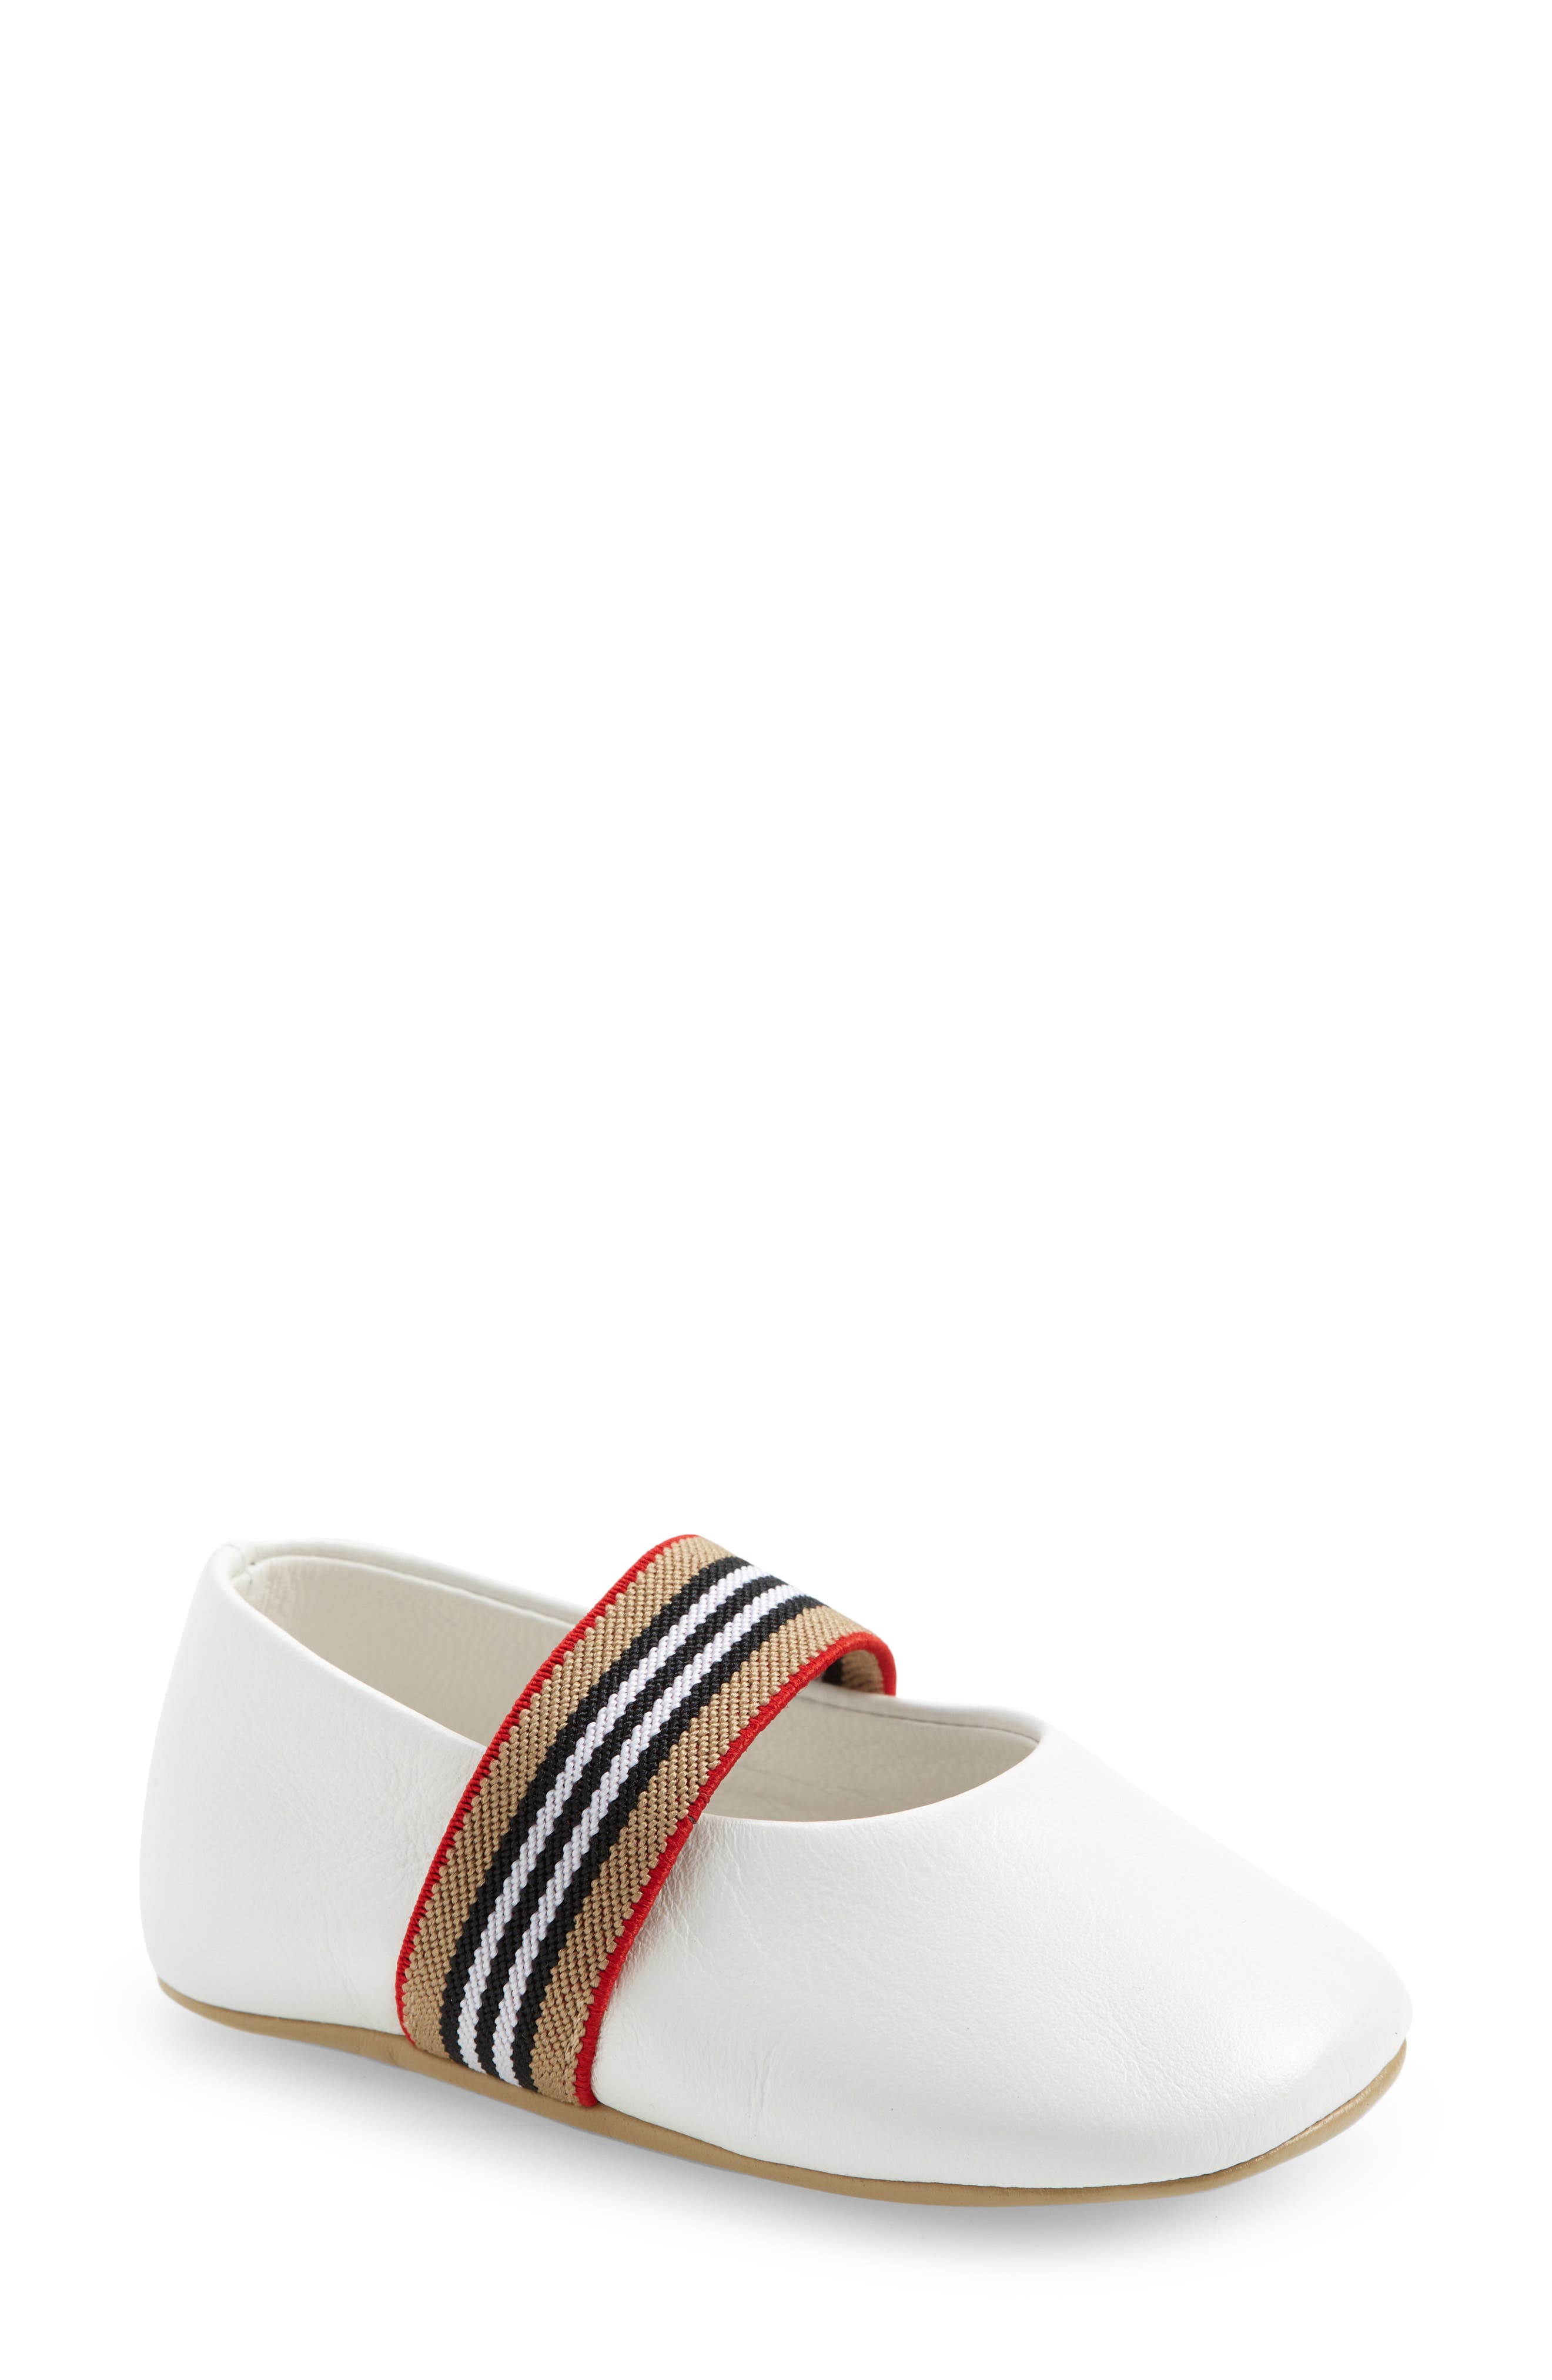 Burberry Livvy Icon Stripe Ballet Crib Shoe in Optic White at Nordstrom, Size 1.5Us